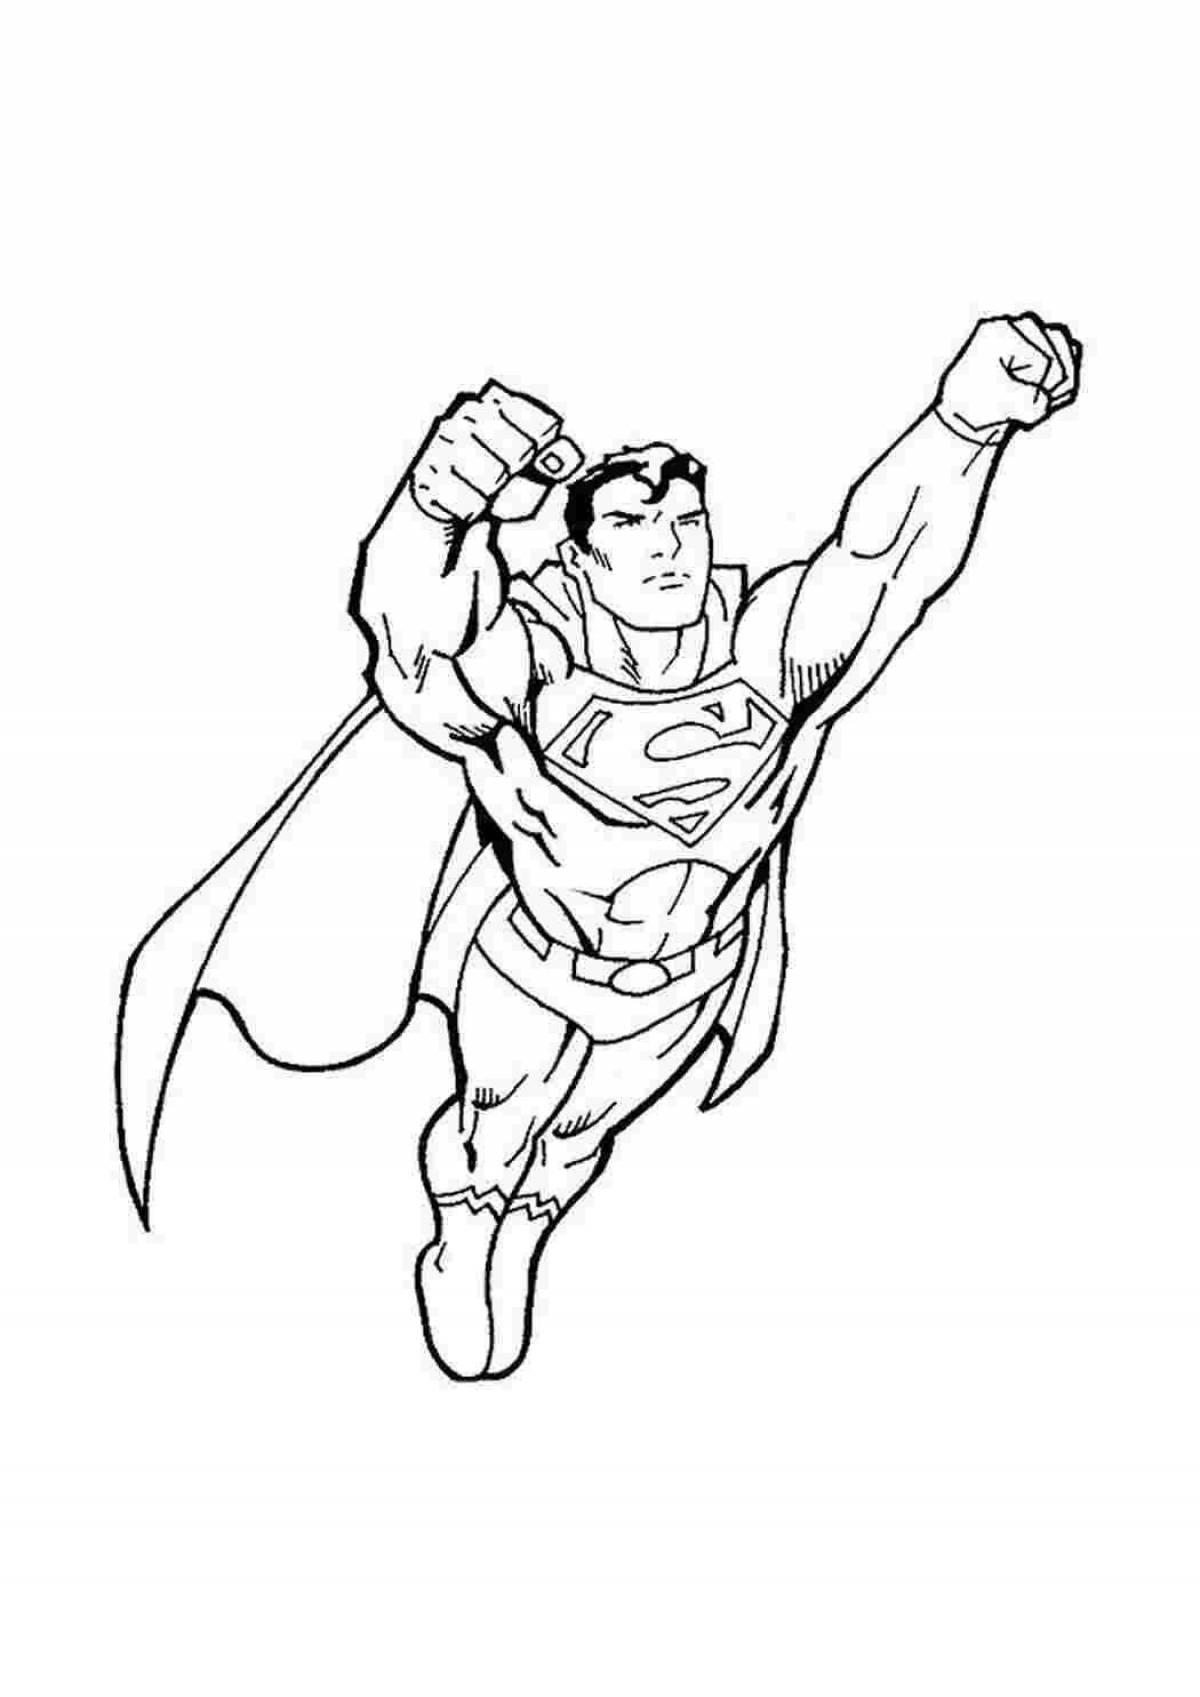 The amazing superman and spiderman coloring book